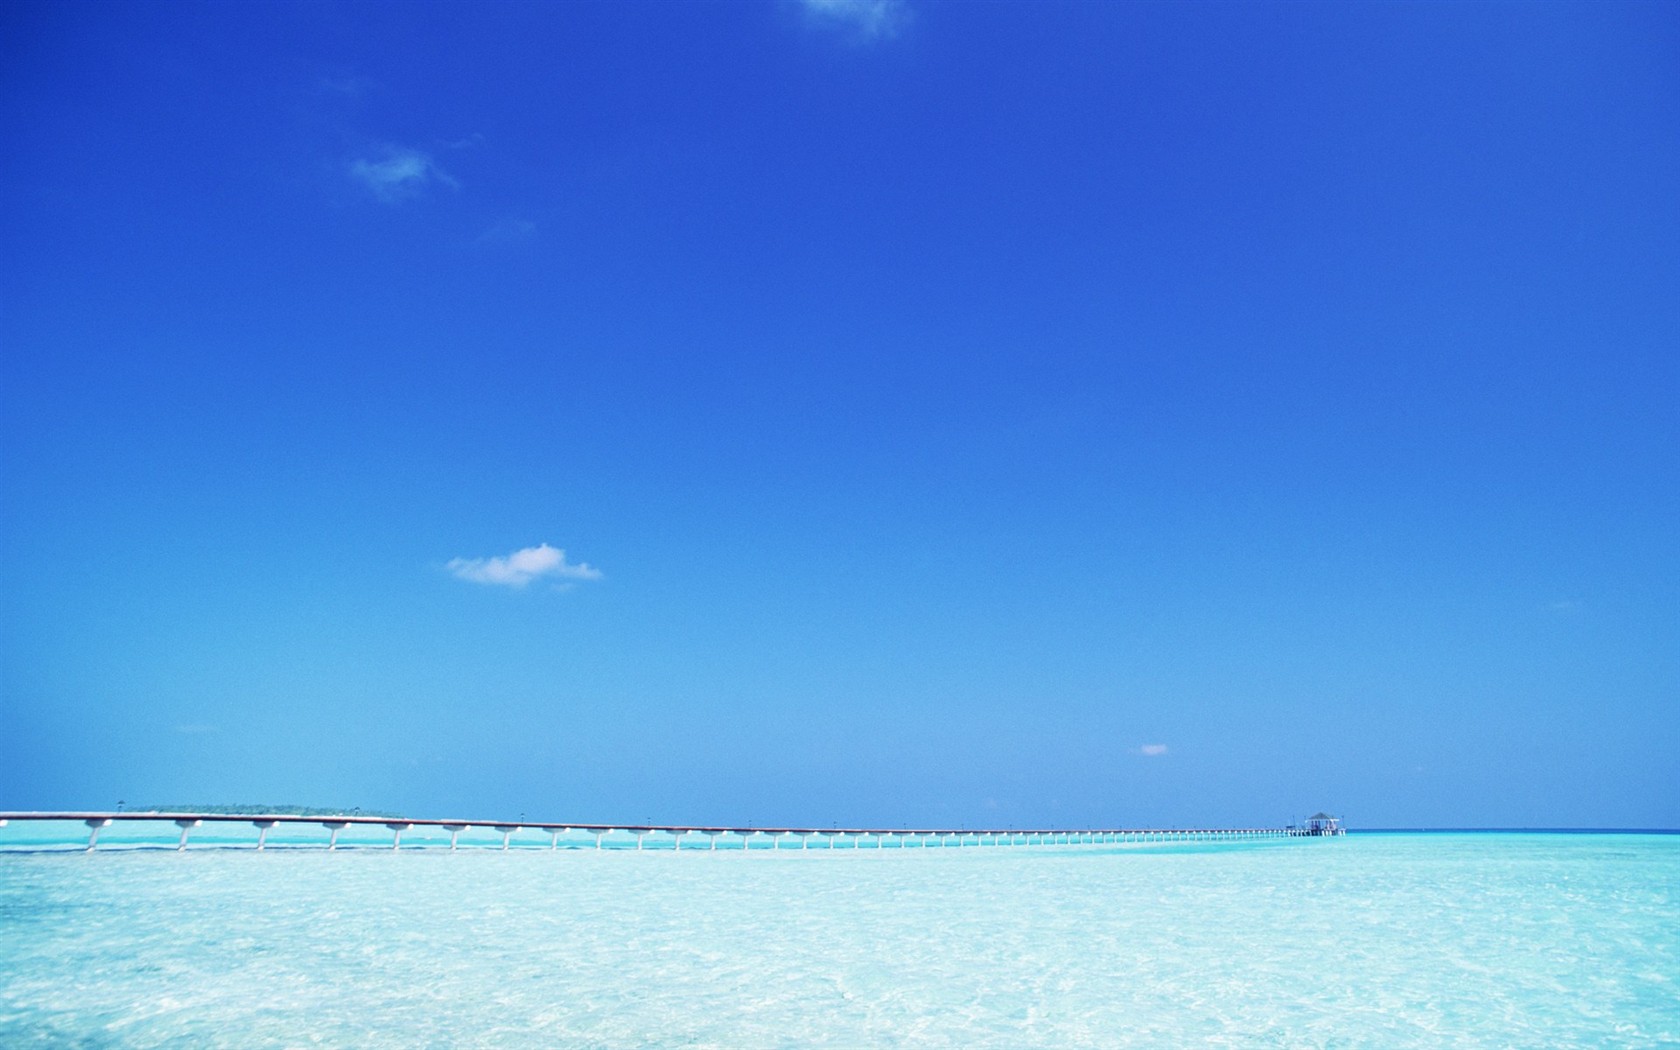 Maldives water and blue sky #22 - 1680x1050